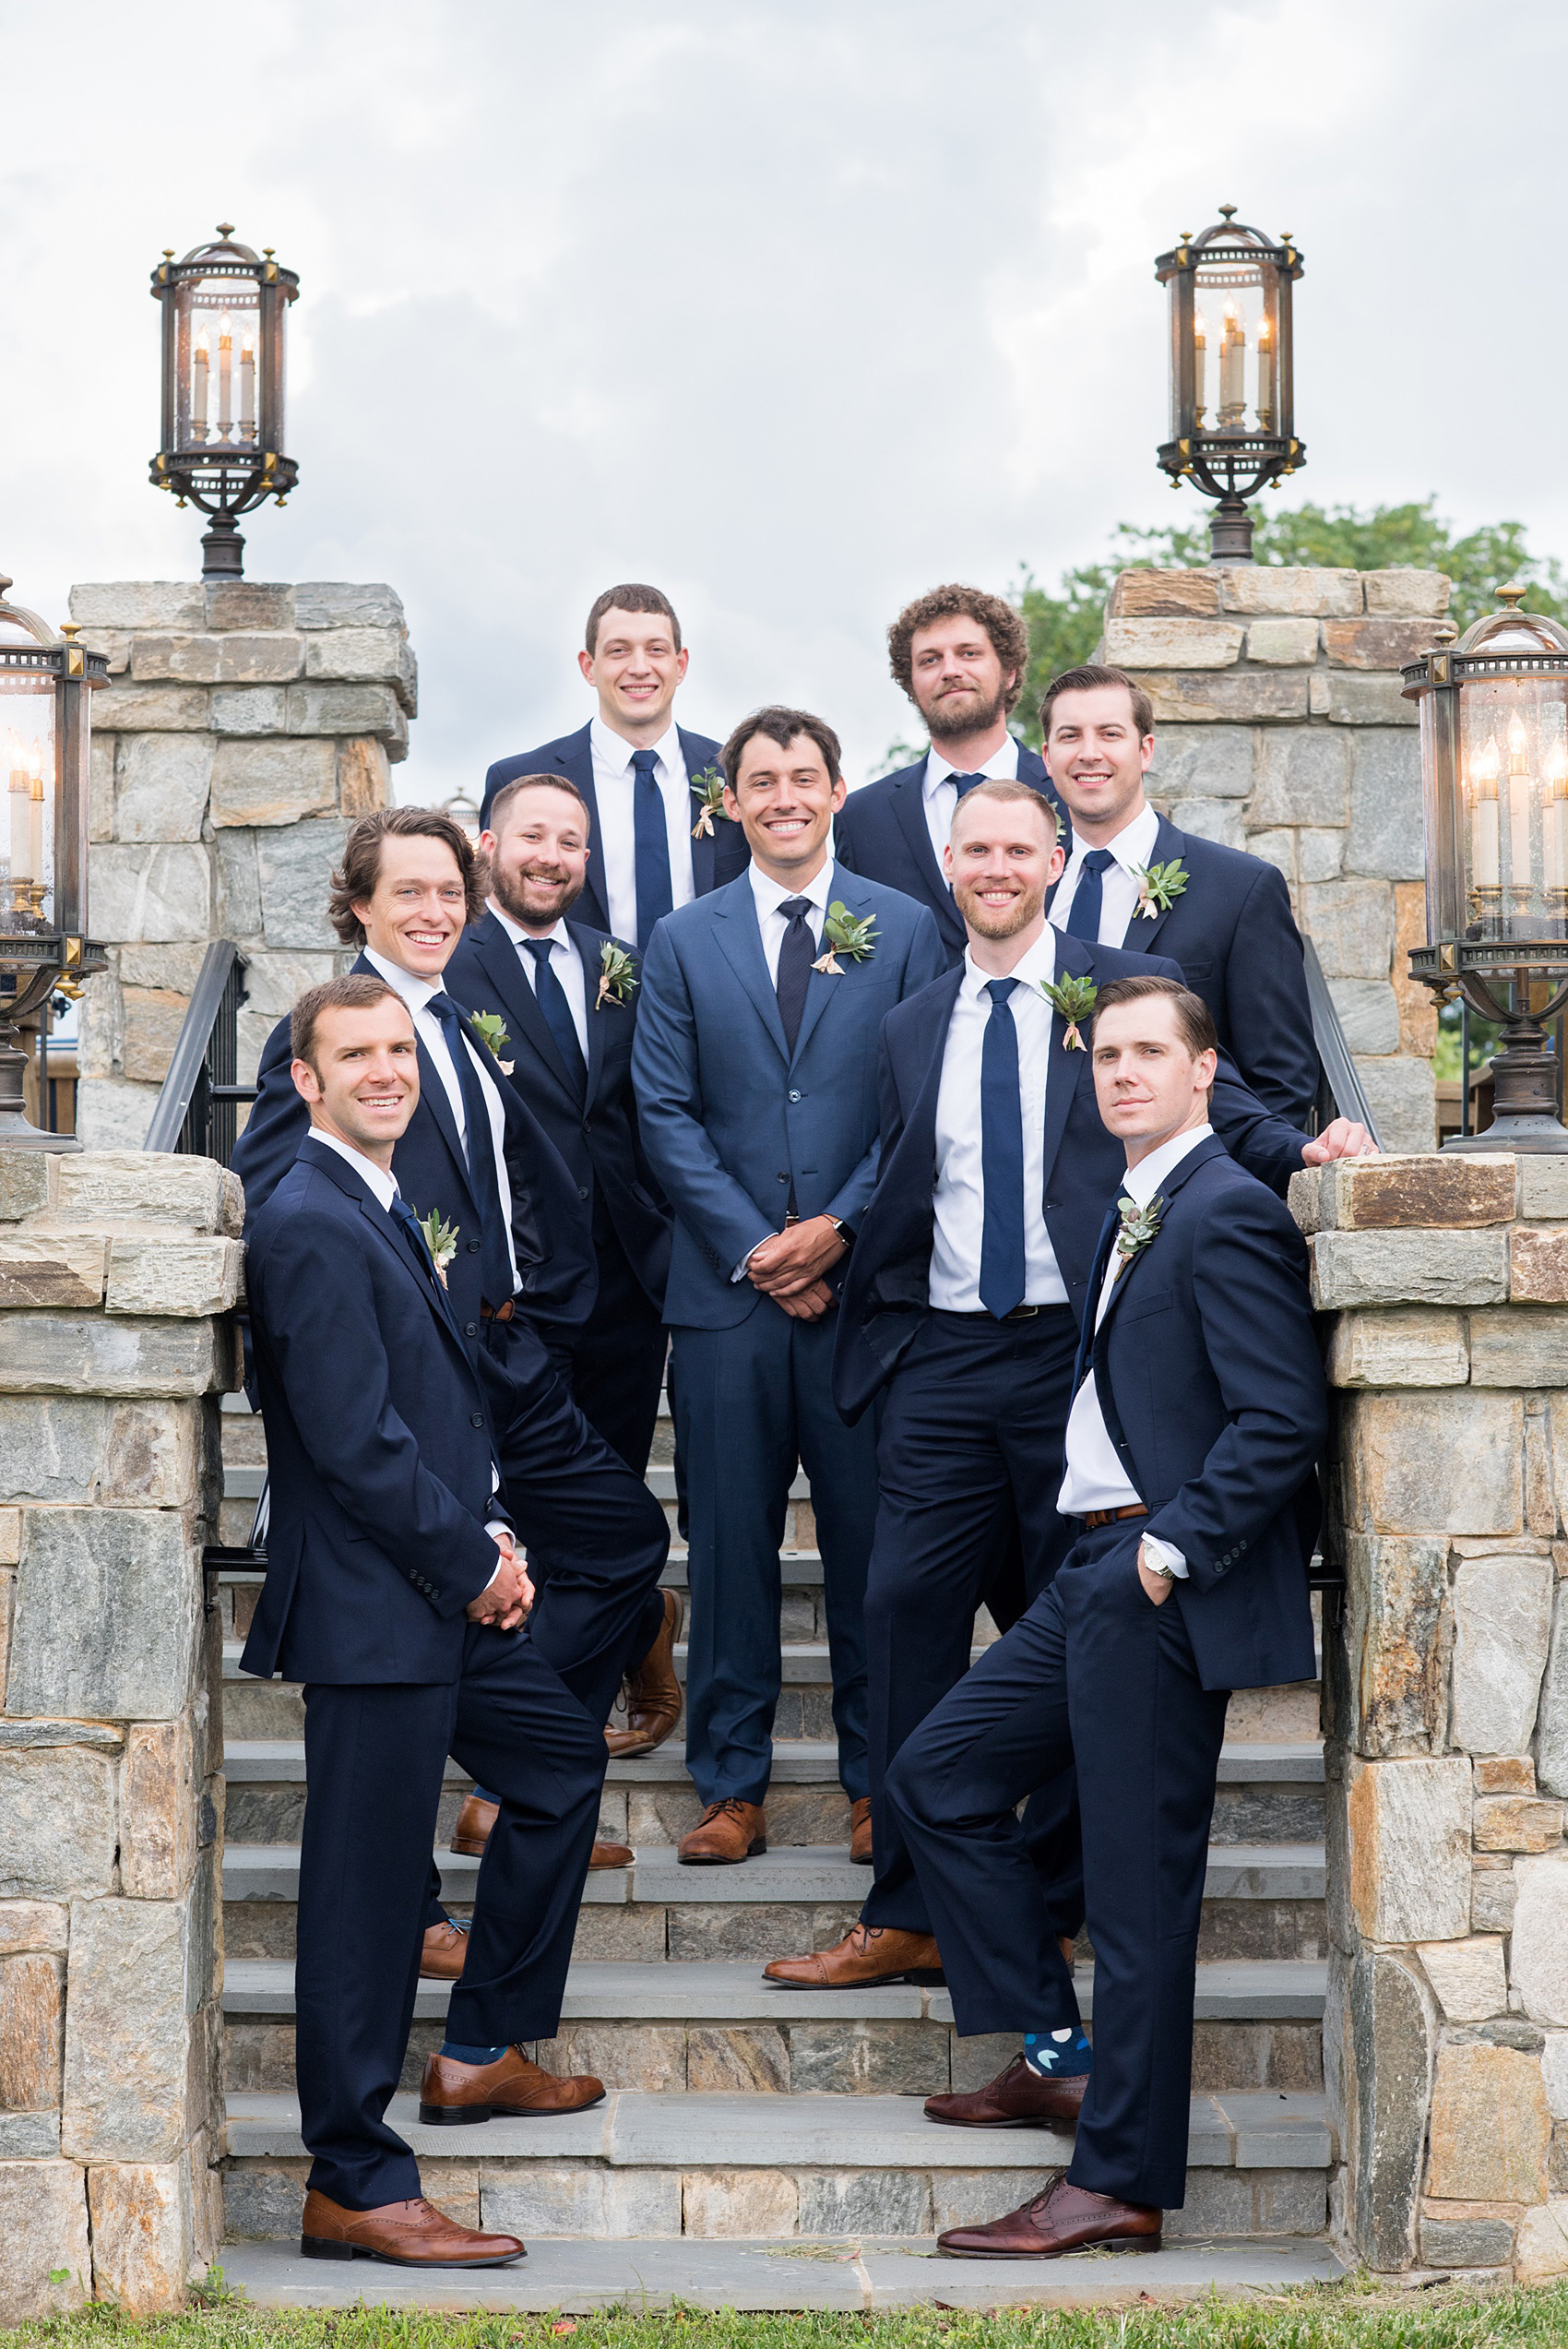 Charlottesville wedding photos by Mikkel Paige Photography at the Lodge at Mount Ida Farm. This Virginia venue is perfect for brides and grooms looking for a beautiful farm reception space. It’s green, romantic, and easy to dress up with flowers or keep simple! The groomsmen wore navy blue suits, succulent boutonnieres, and bridesmaids wore mismatched mint green gowns with colorful bouquets. Click through for the complete post from this May event! Planning and design by @vivalevent and flowers by @apassarelli of Meristem Floral. #Charlottesville #mountidafarm #lodgeatmountida #CharlottesvilleVA #CharlottesvilleVirginia #Charlottesvillewedding #Charlottesvilleweddingphotographer #mikkelpaige #MeristemFloral #VivaLEvent